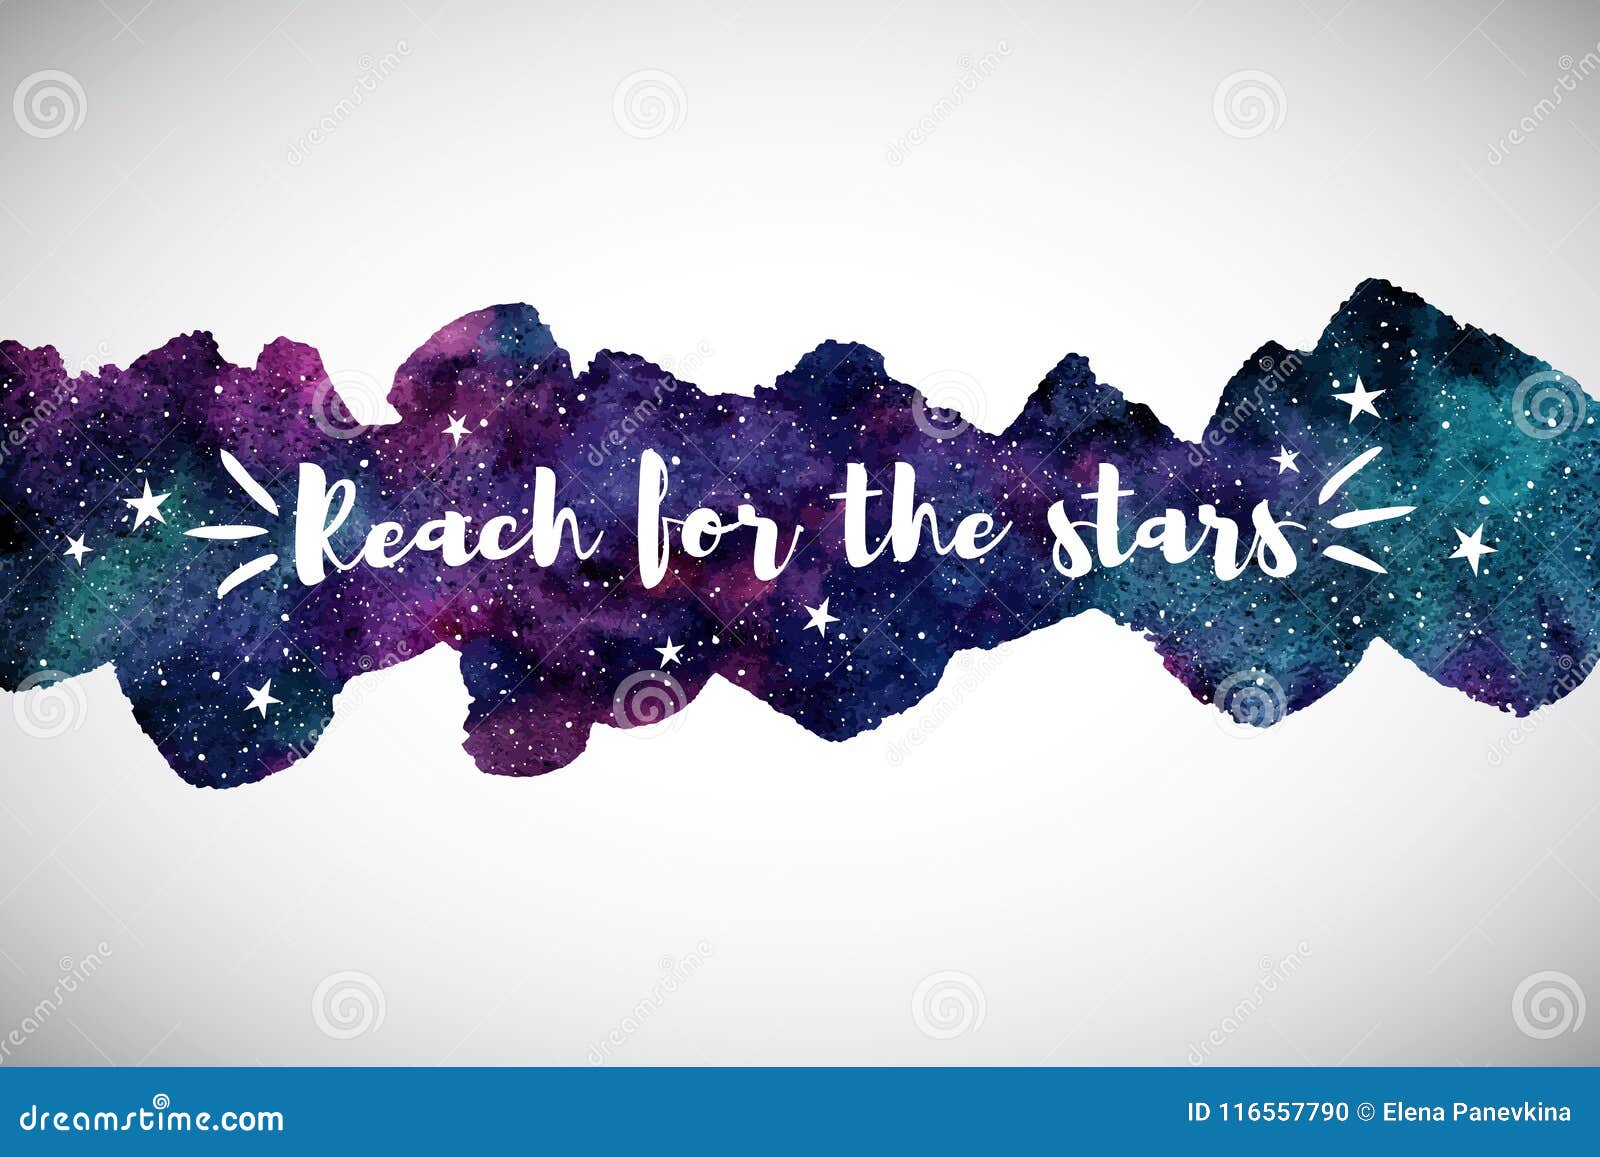 Colorful Watercolor Space Galaxy Border Motivation Quote Stock